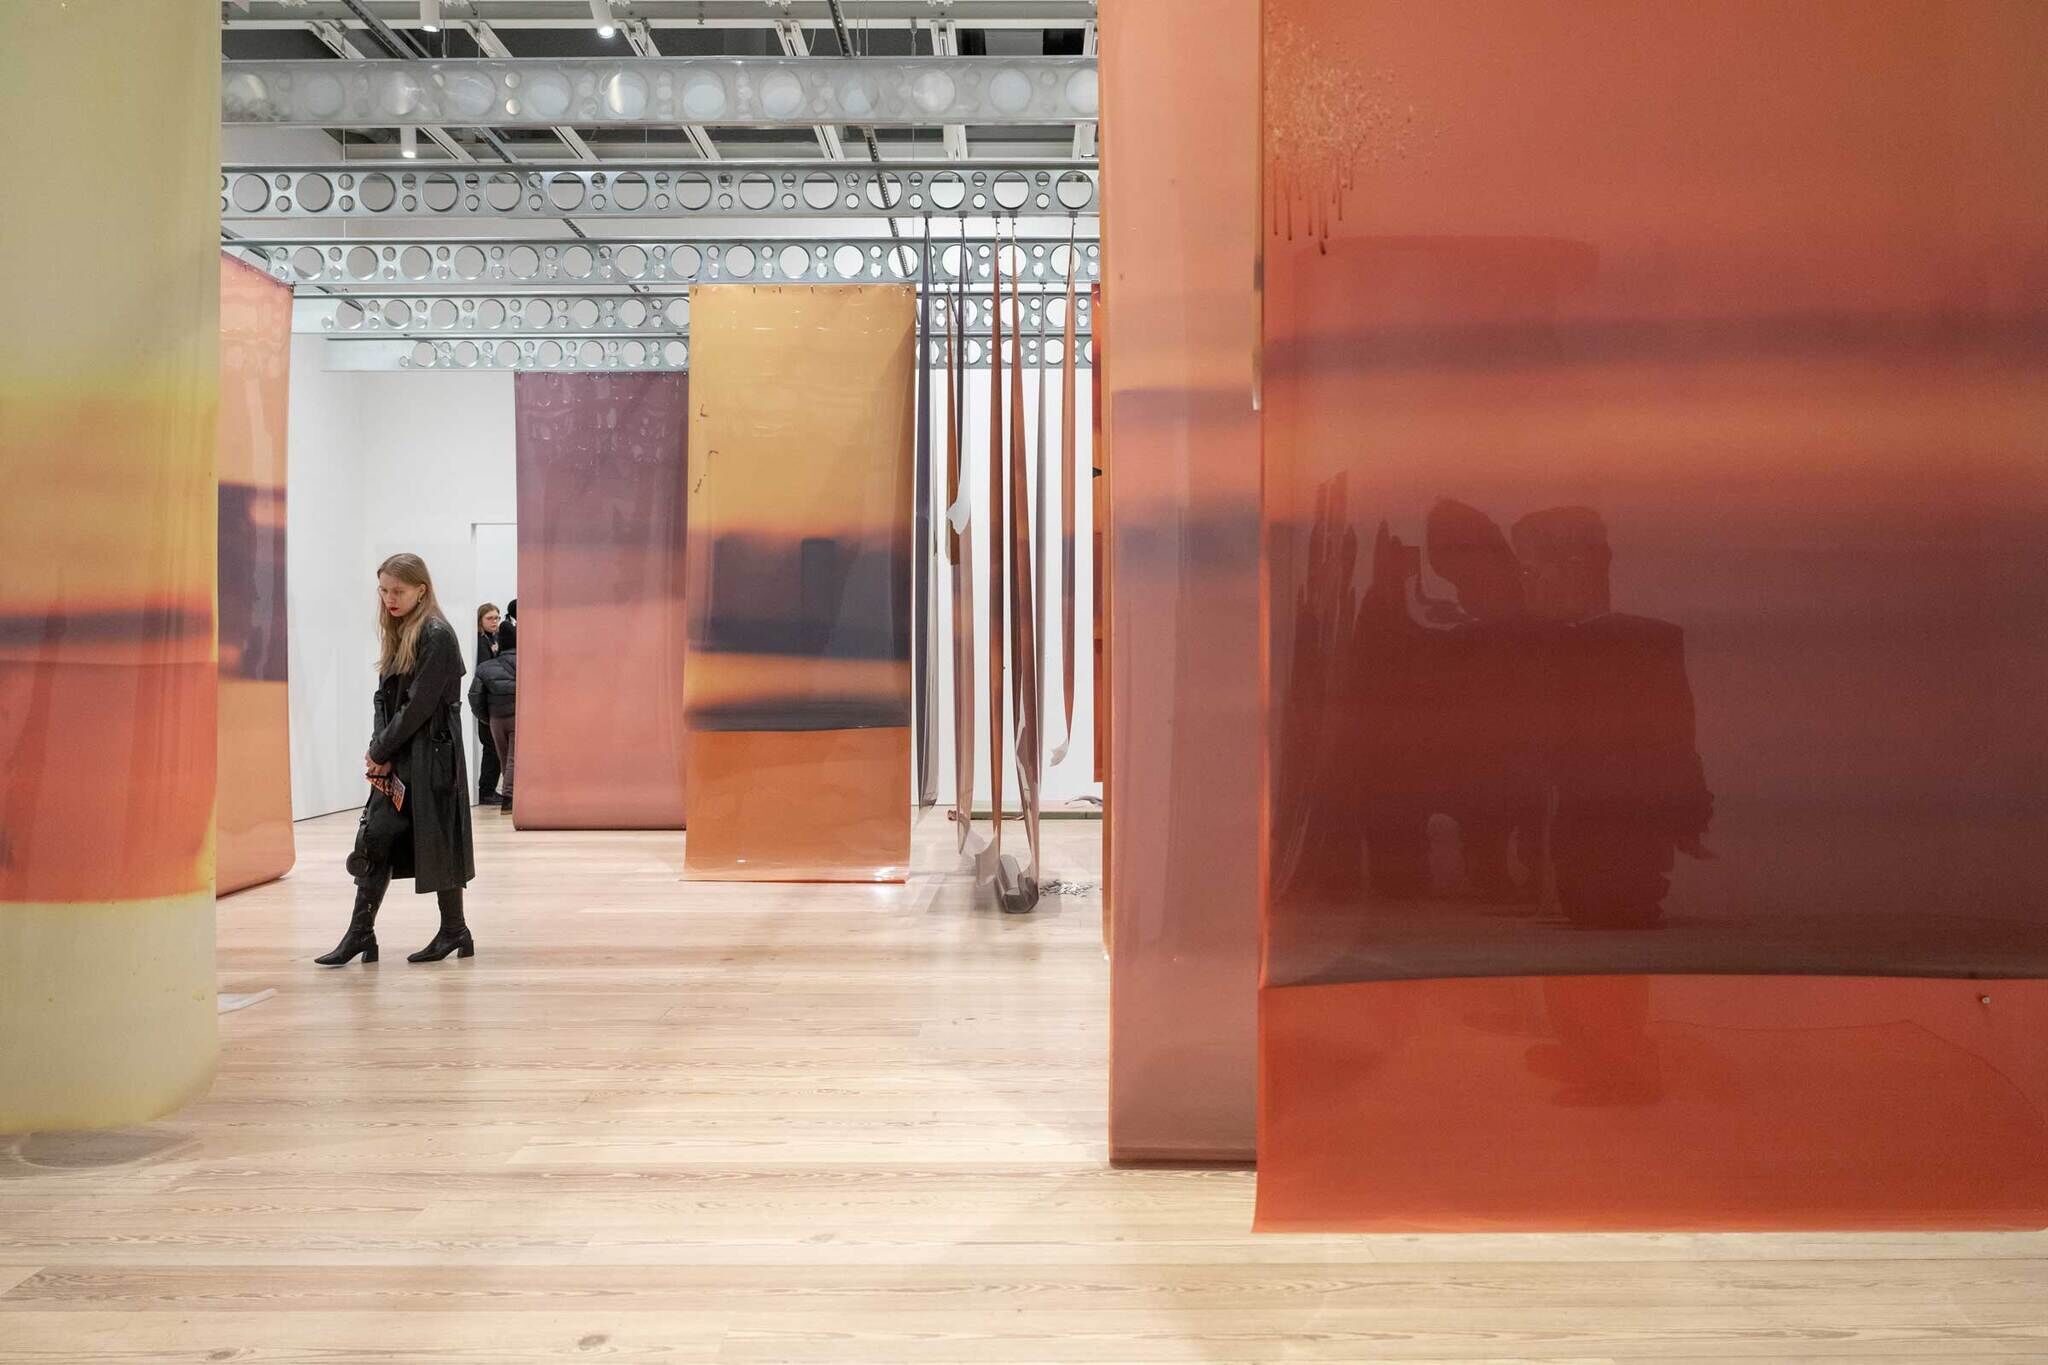 A woman in a black coat walks through an art installation with large, semi-transparent colored panels hanging from the ceiling.